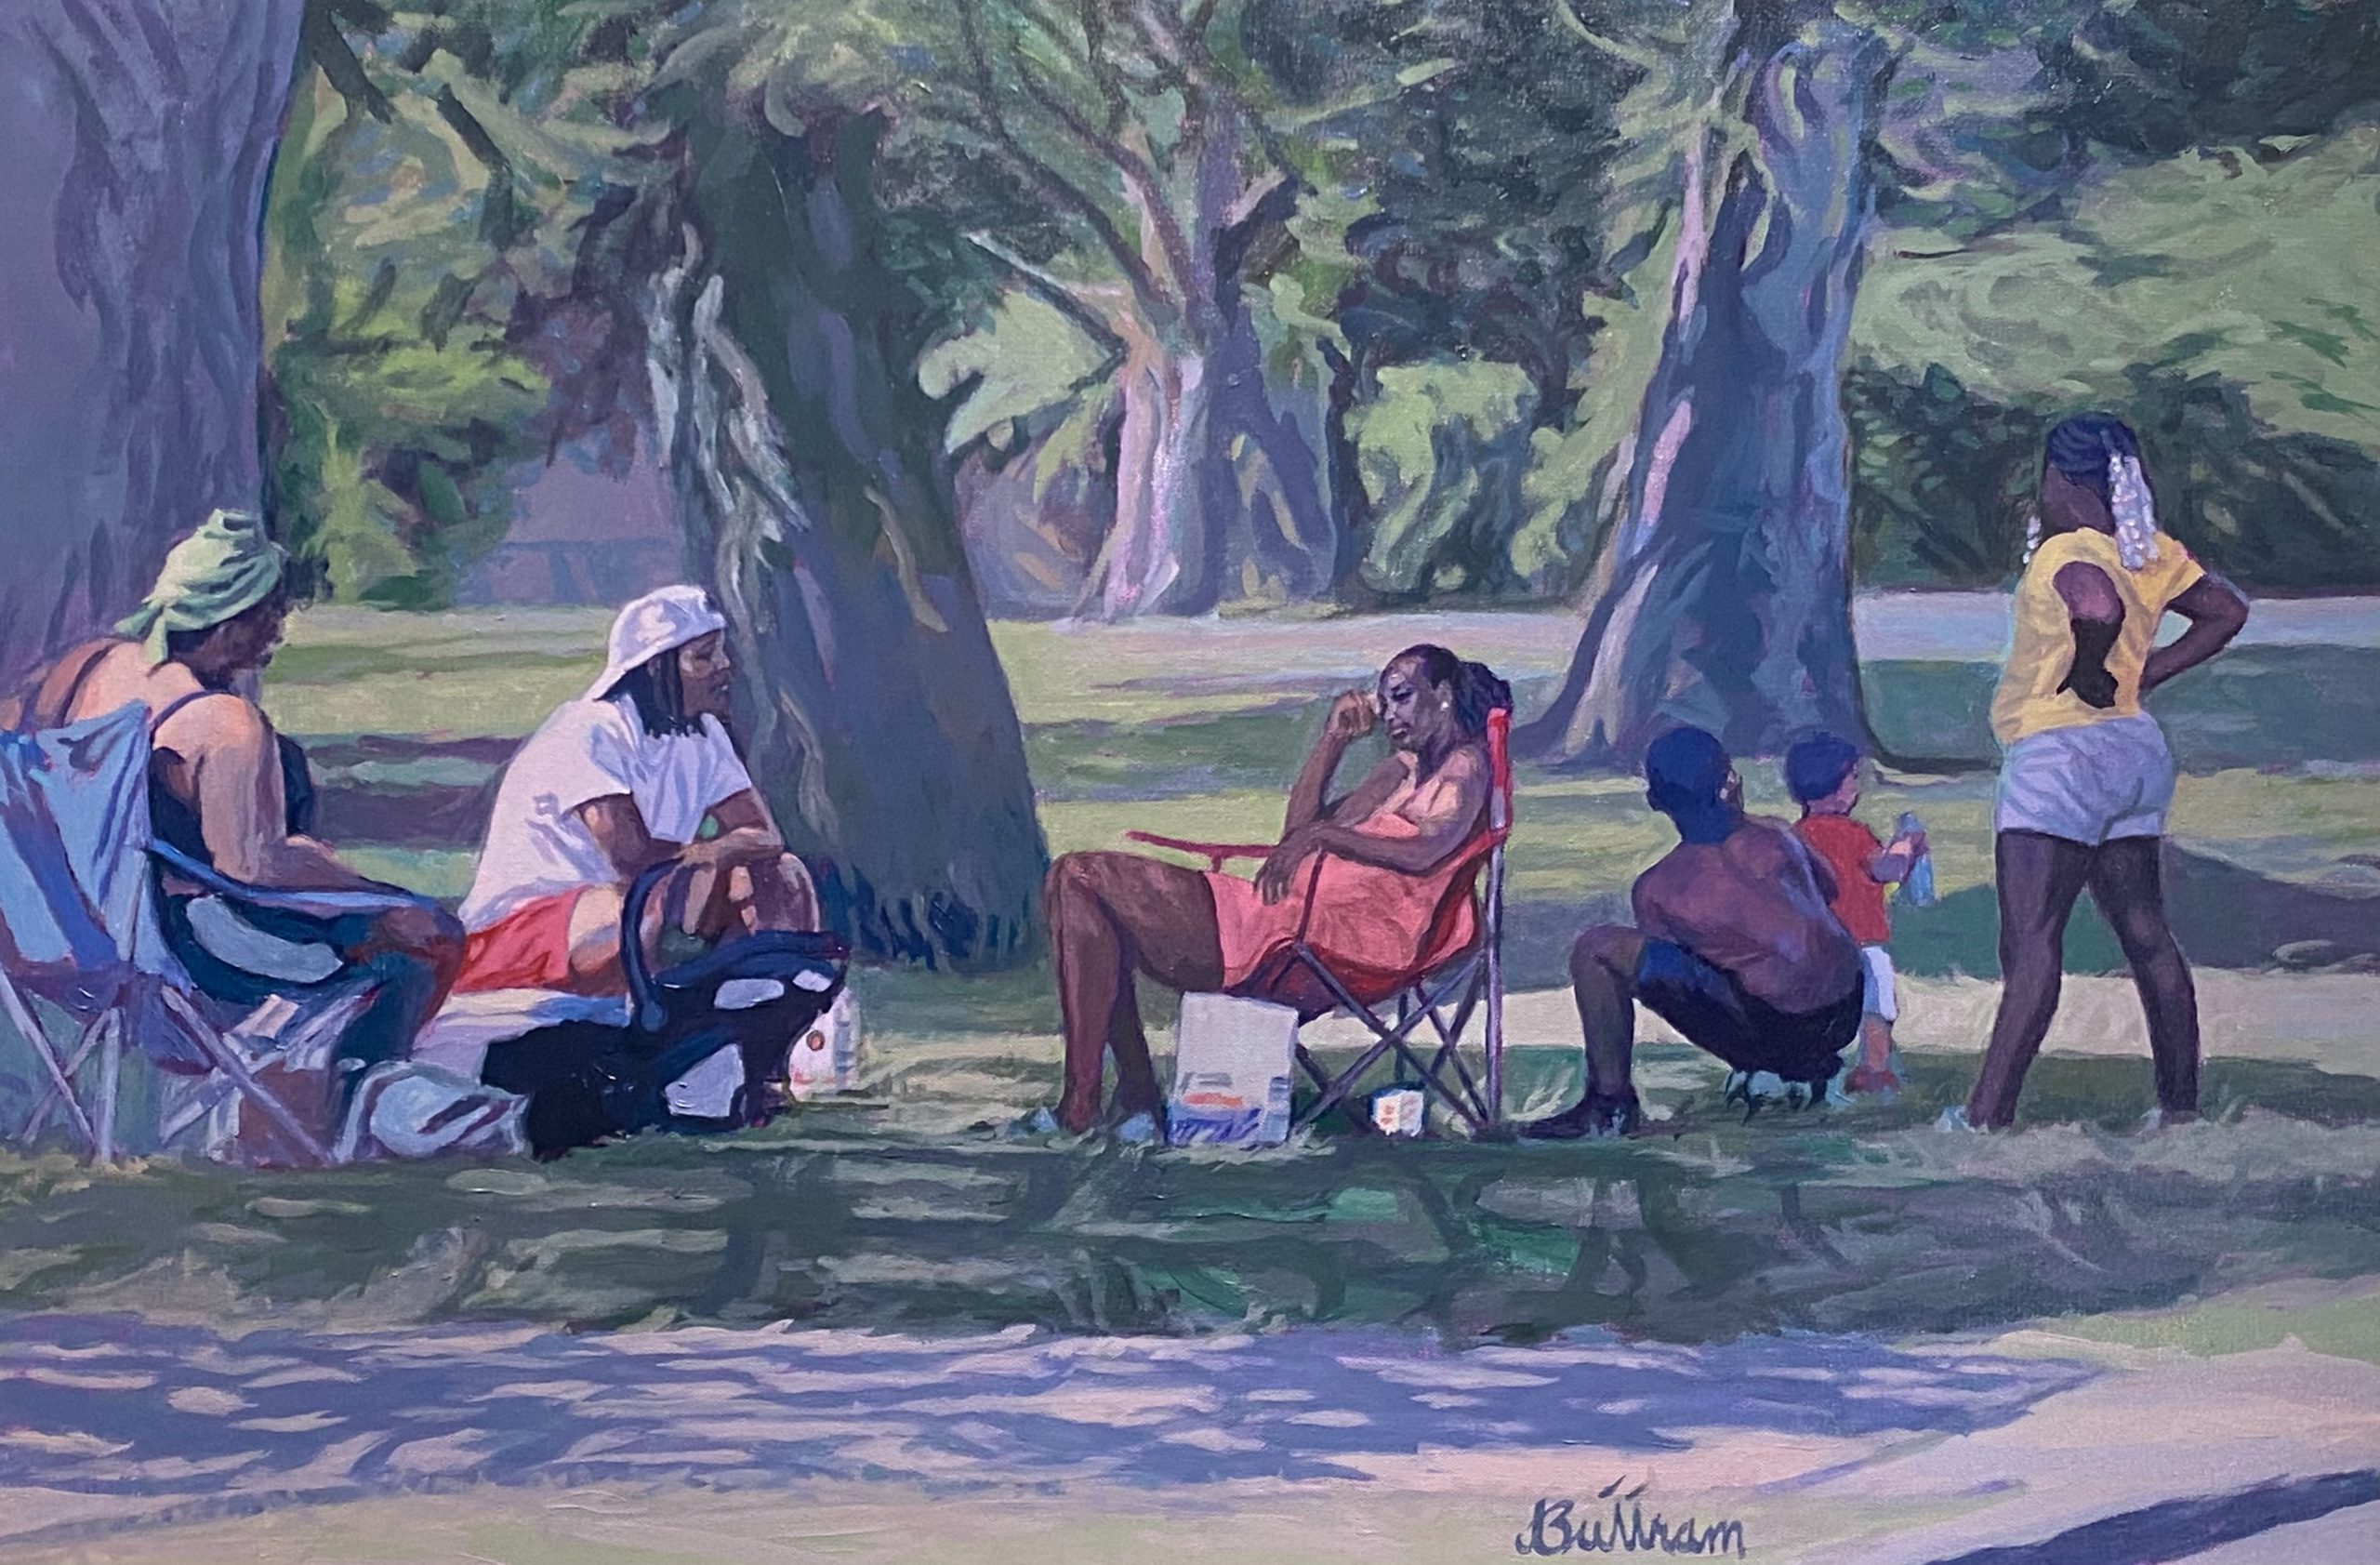 "In the Shade" by David Buttram